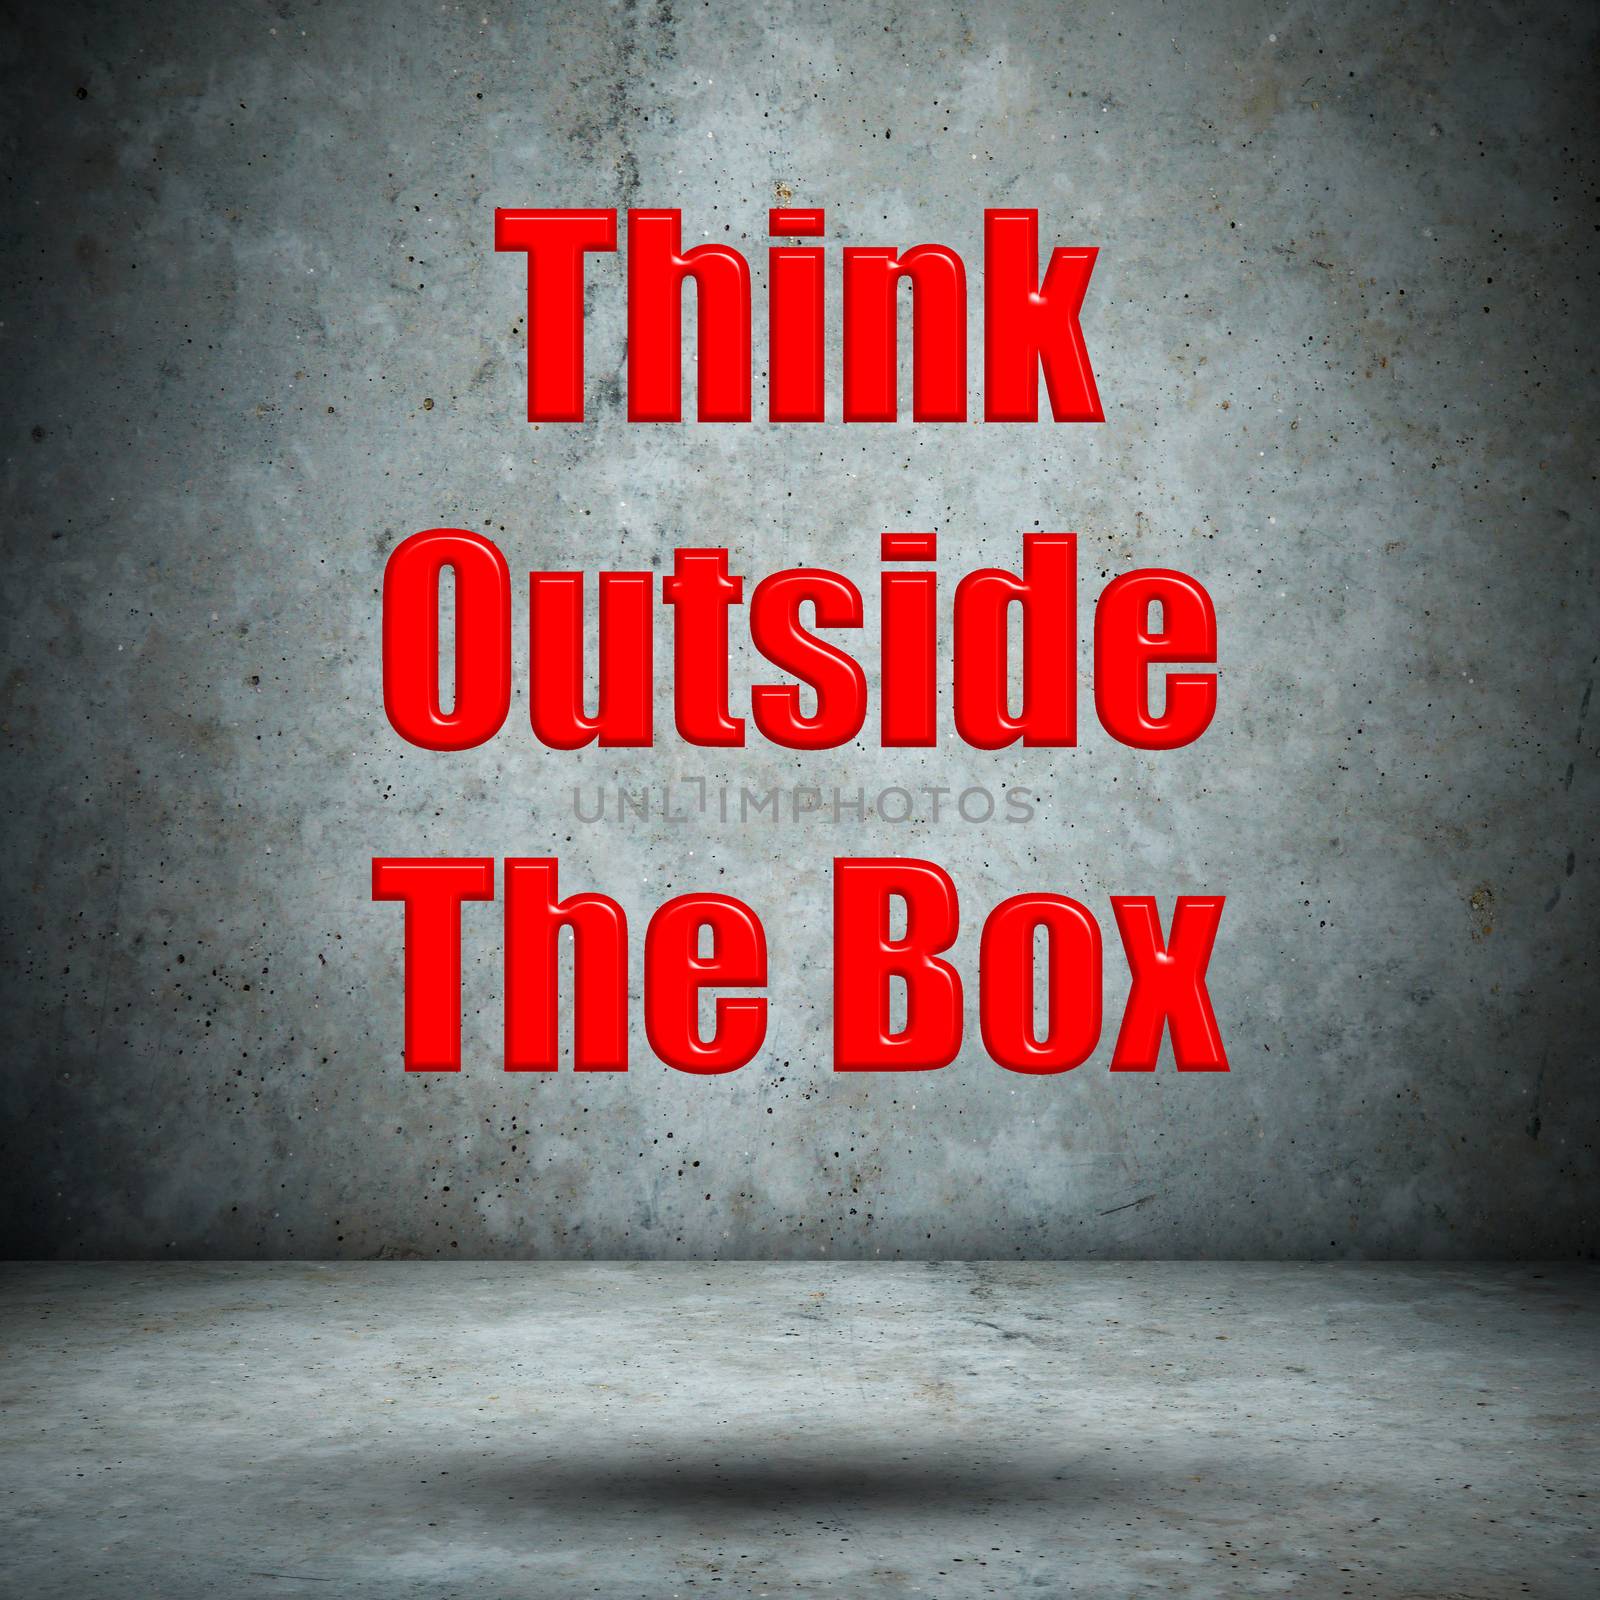 Think Outside The Box concrete wall